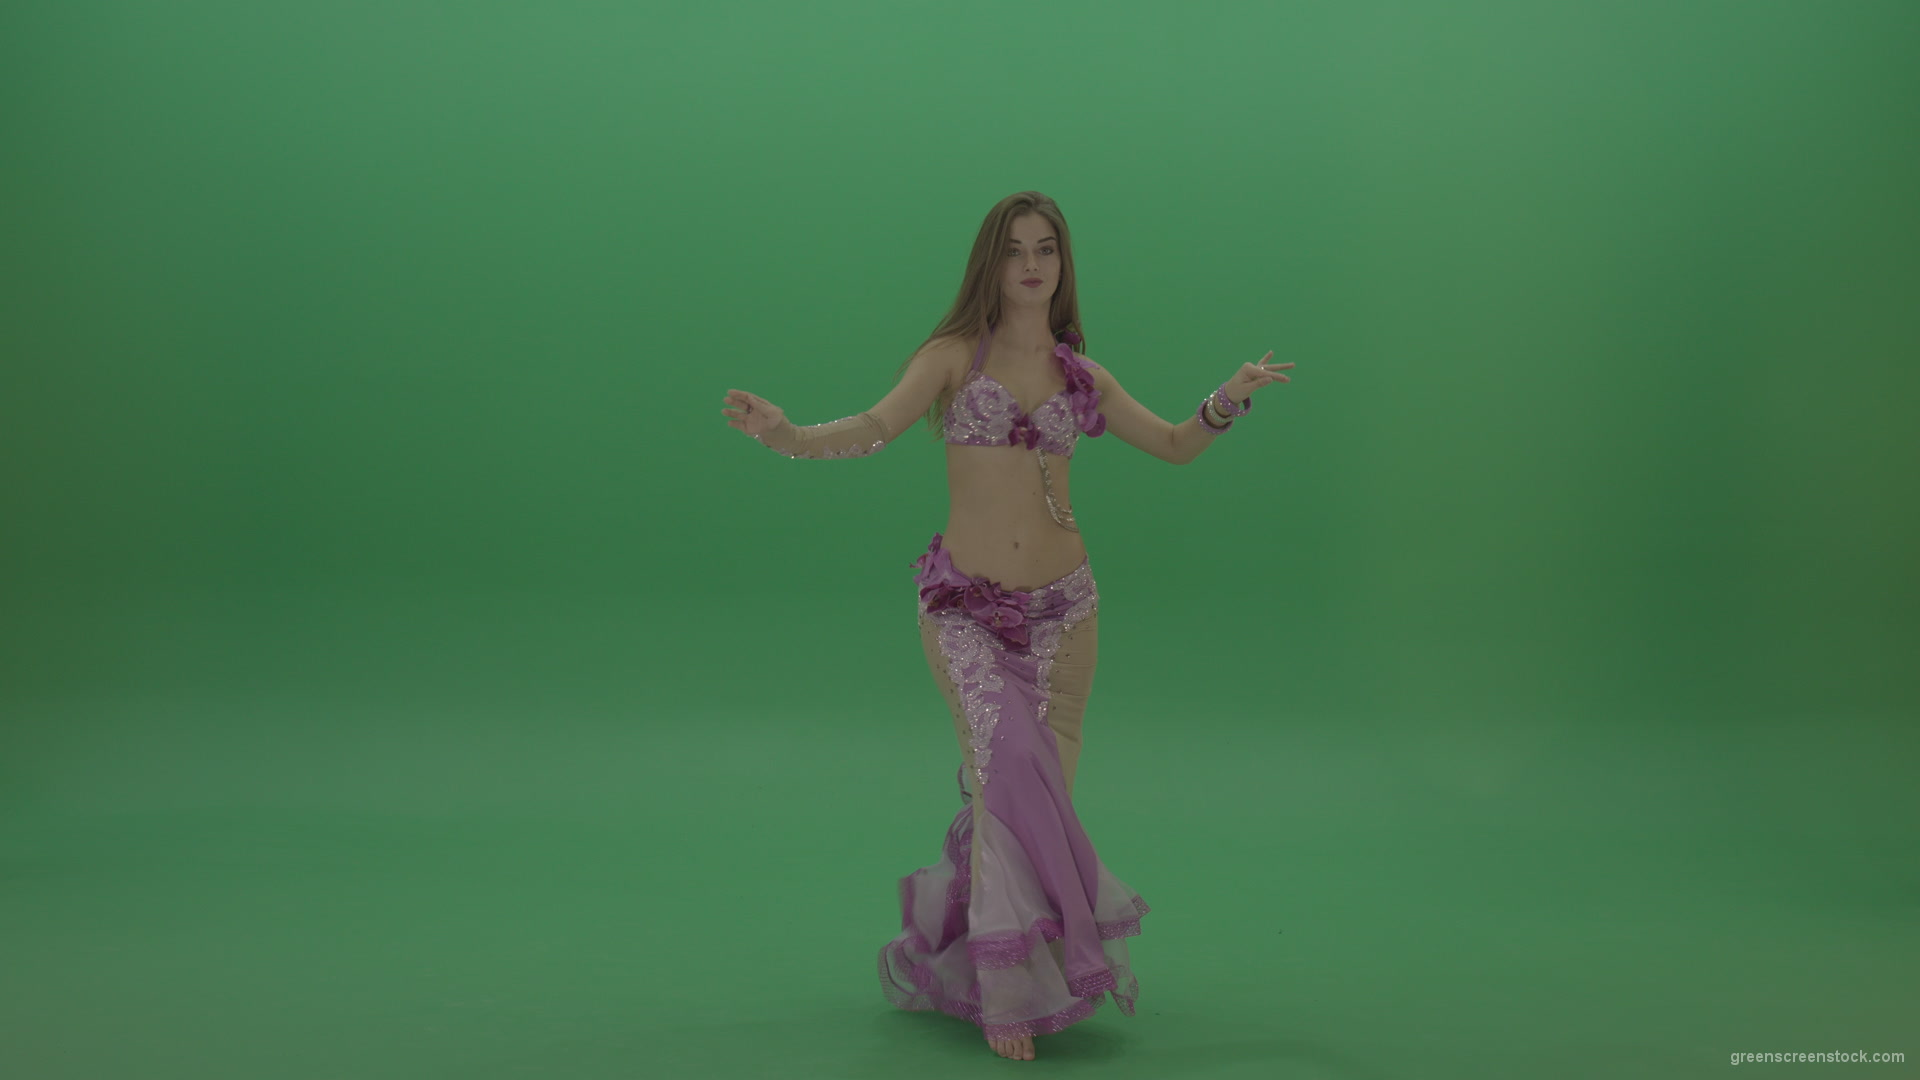 Delightful-belly-dancer-in-pink-wear-display-amazing-dance-moves-over-chromakey-background_005 Green Screen Stock